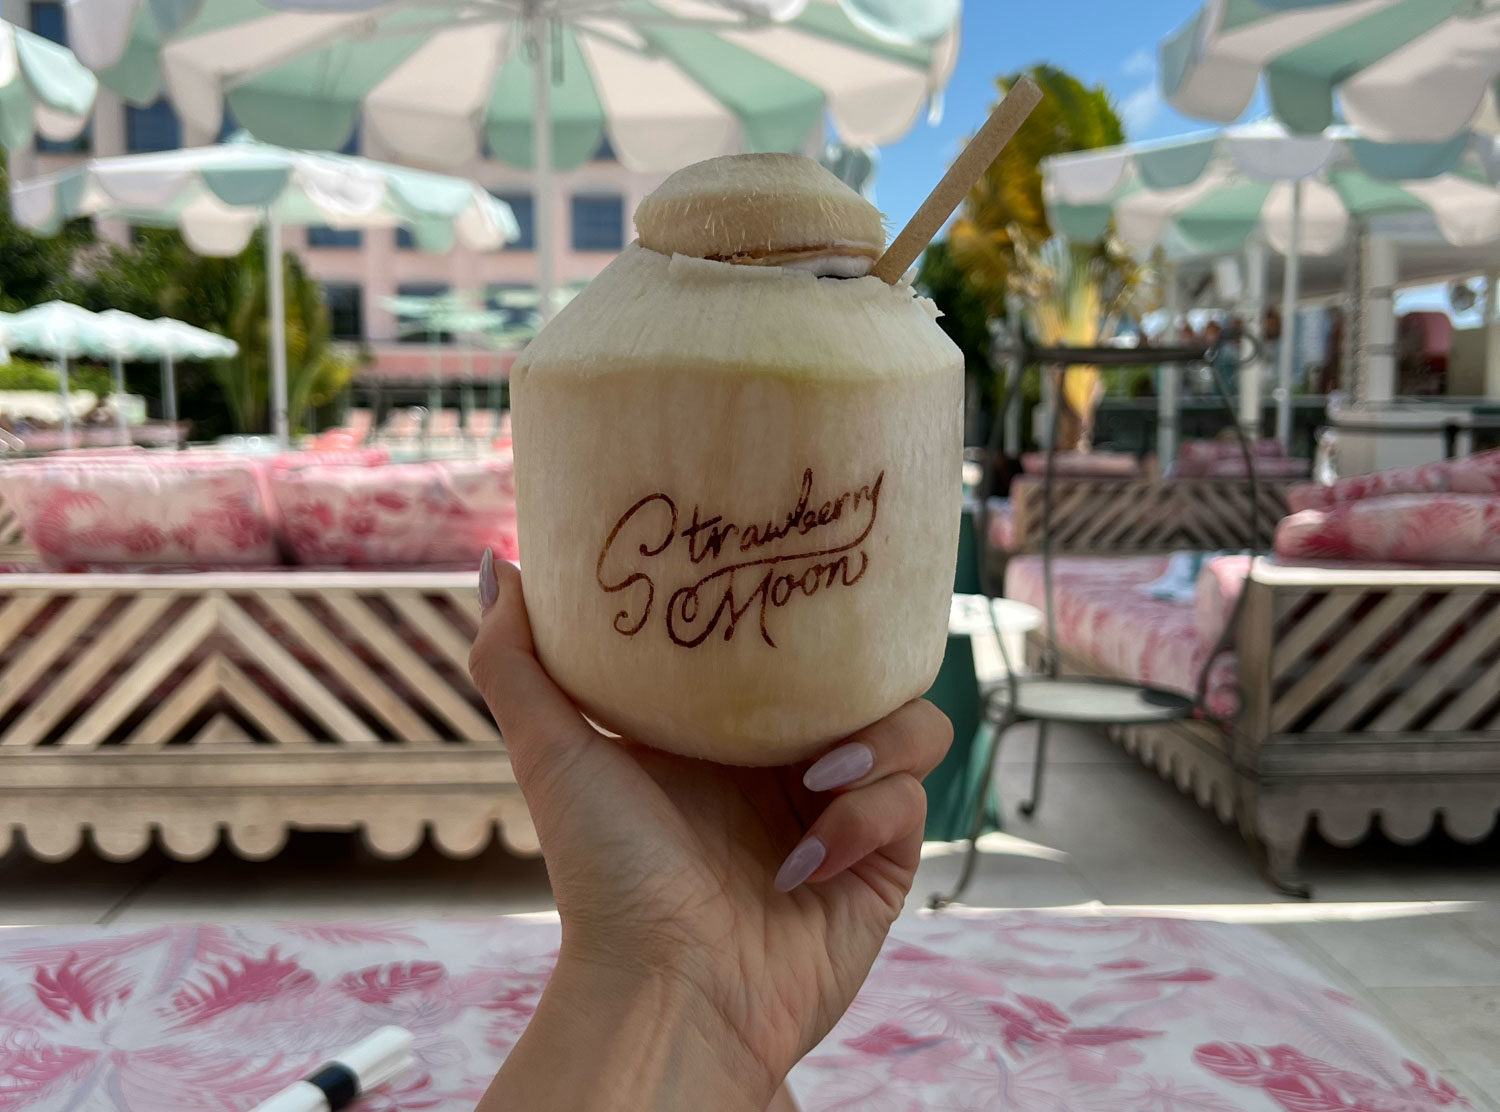 The Goodtime Hotel But first some coconut bevvy at Strawberry Moon